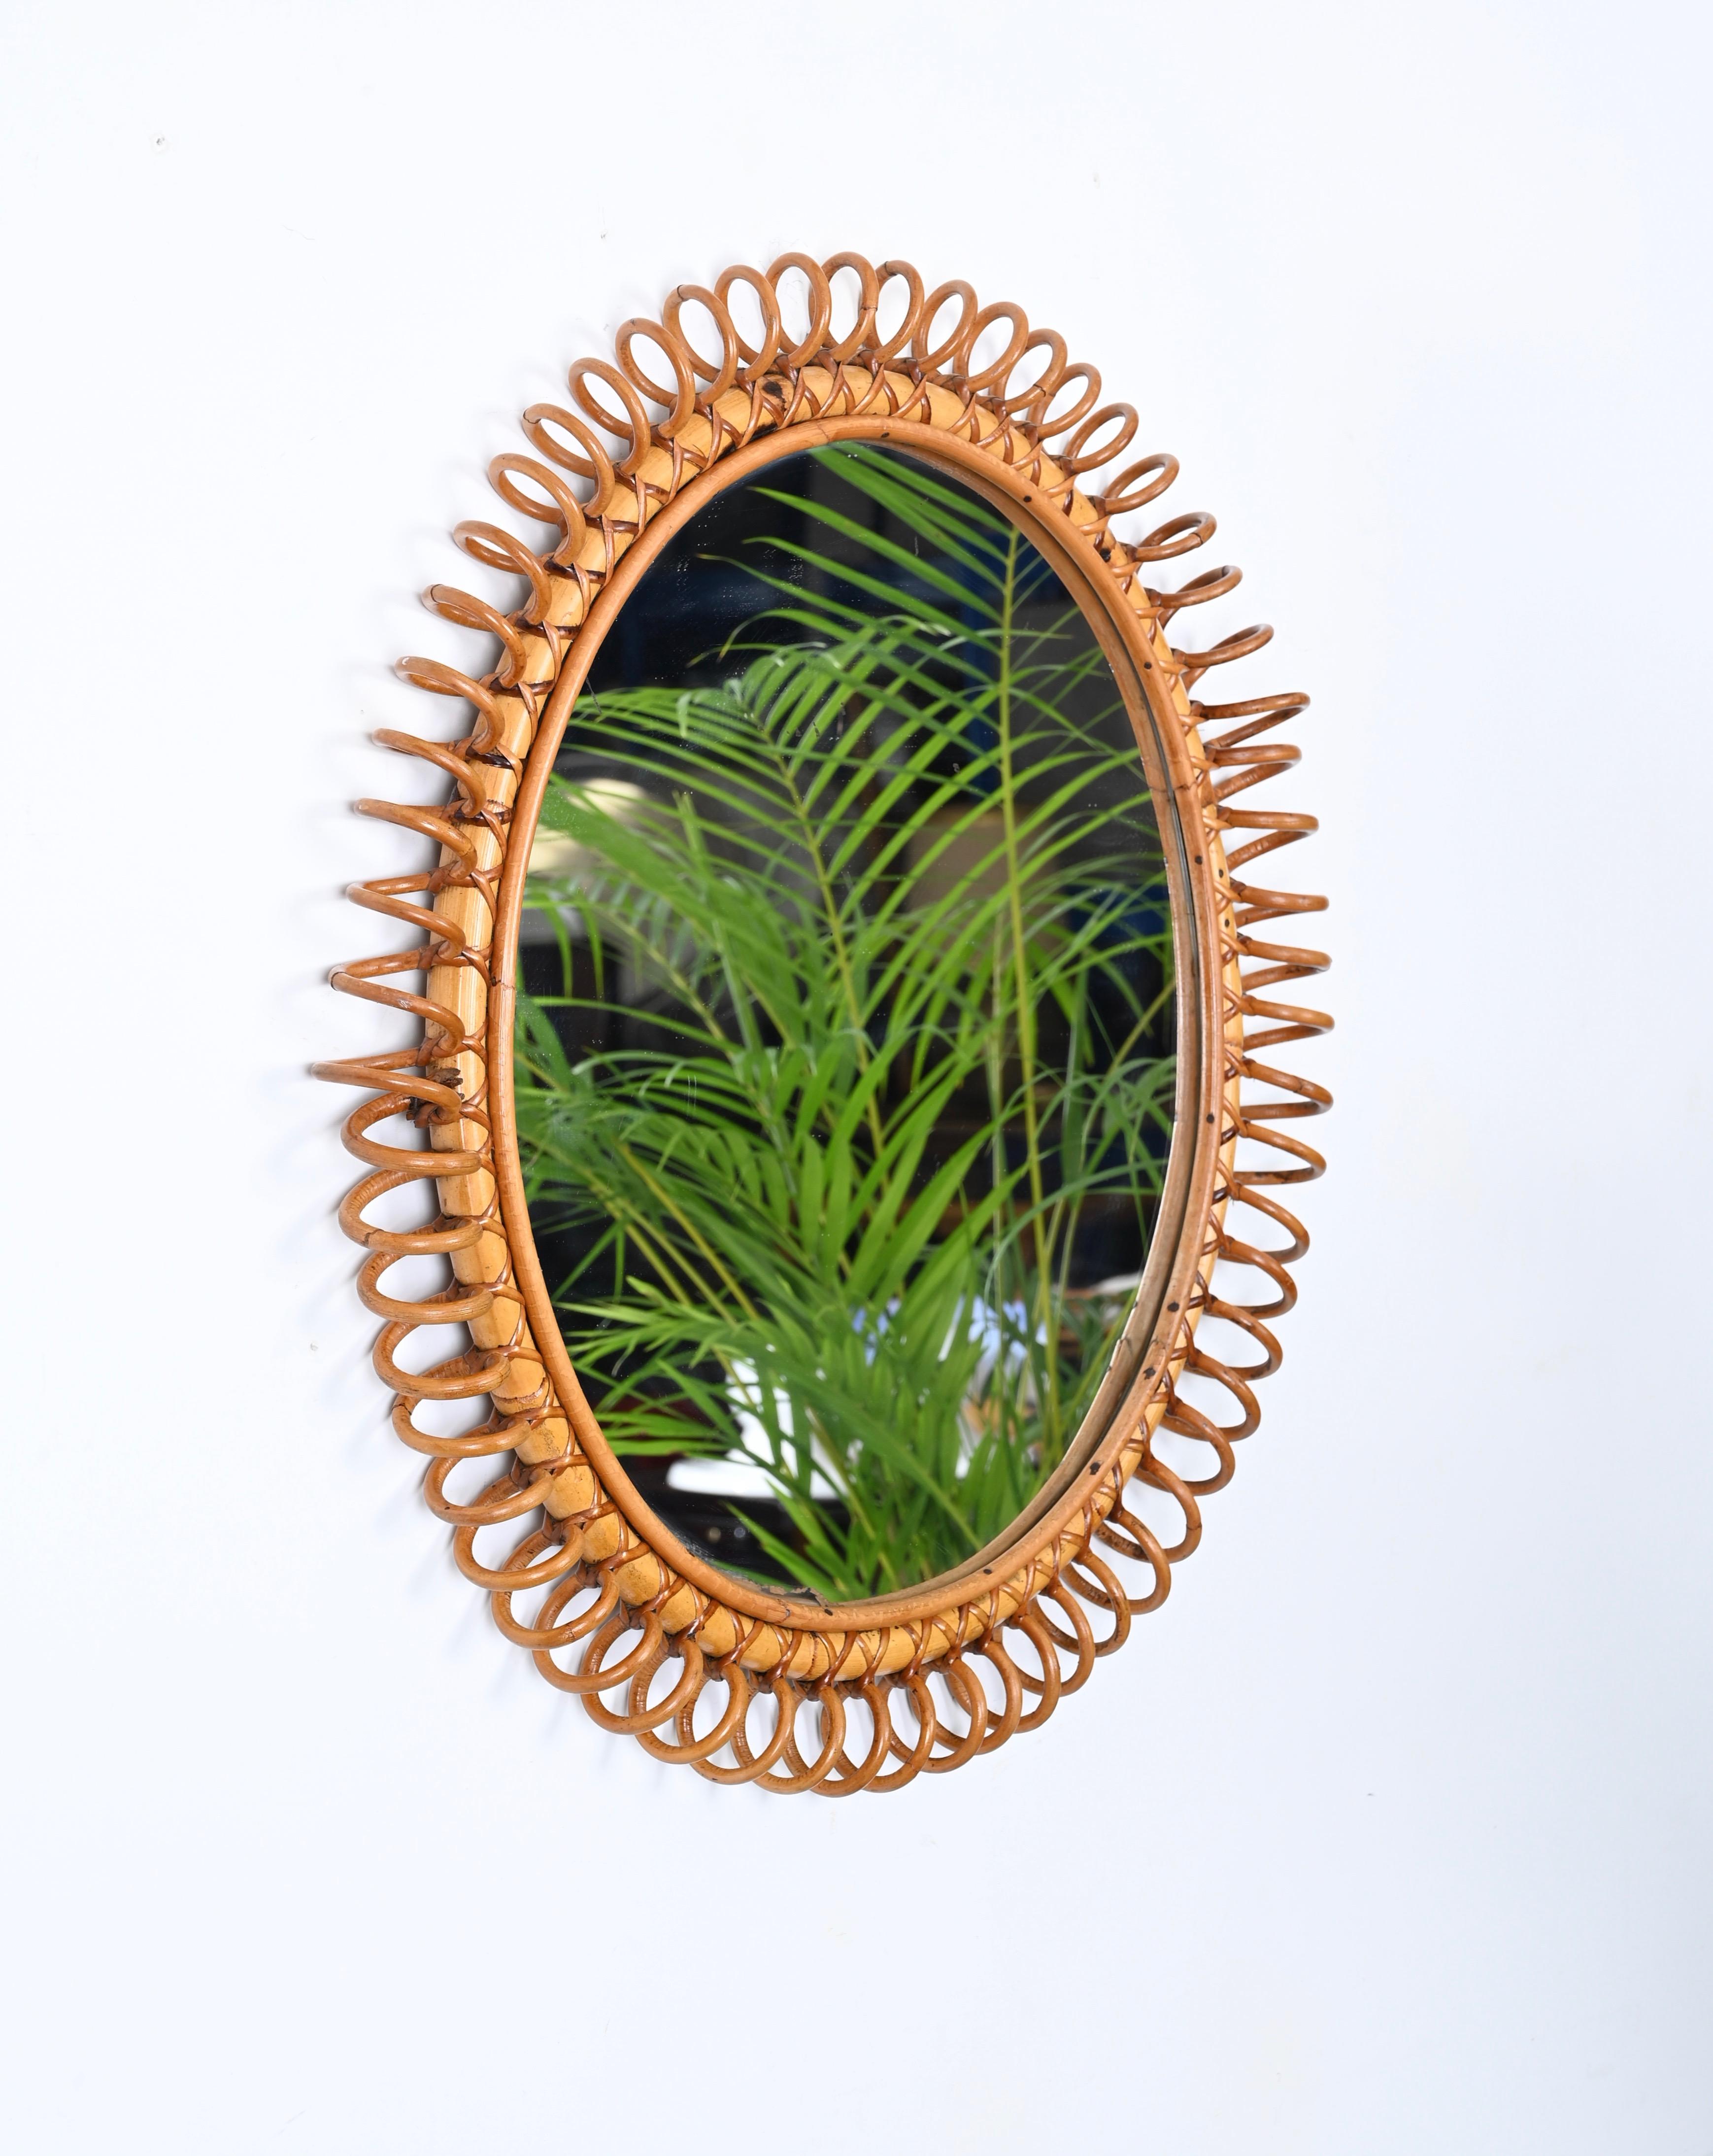 Marvelous large midcentury round shaped mirror in curved rattan, bamboo and wicker. This fantastic piece was designed in Italy during the 1960s in Cote D'Azur style. 

This lovely mirror features a stunning spiral-shaped frame in curved rattan and